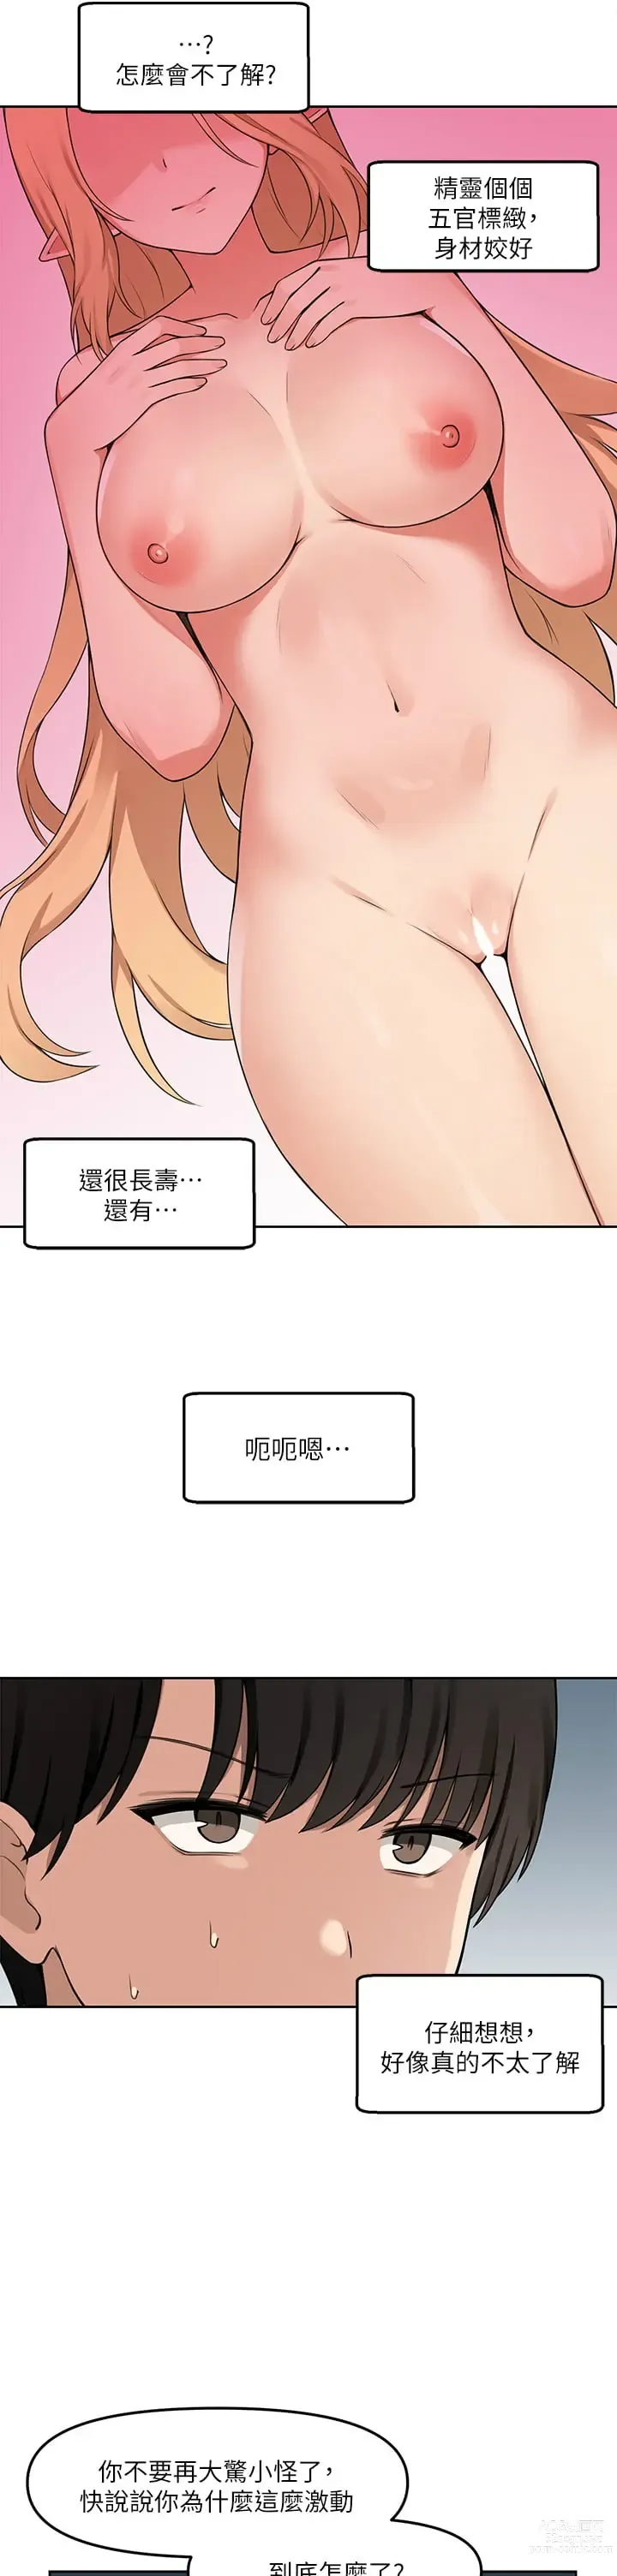 Page 6 of manga 抖M女仆/ Elf Who Likes To Be Humiliated